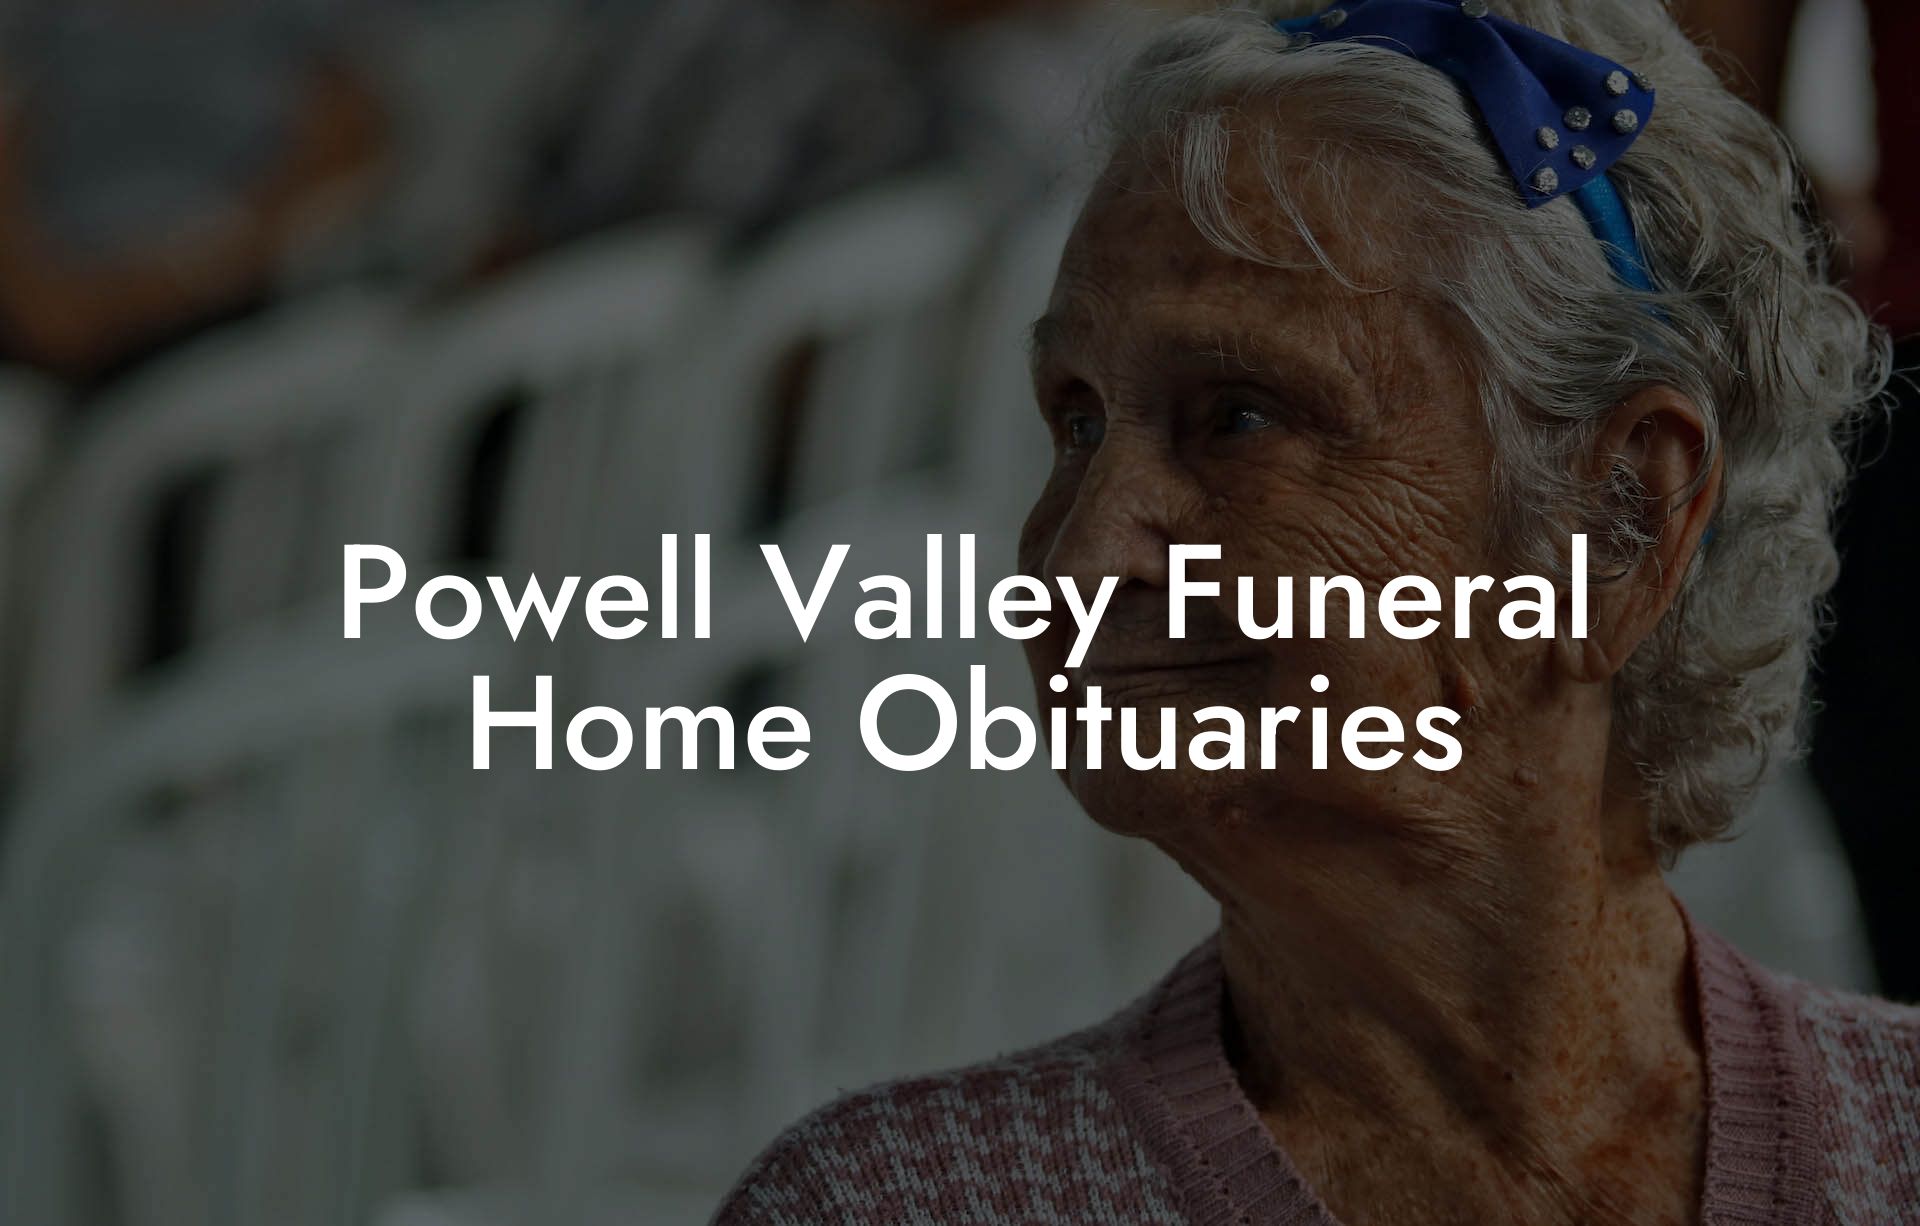 Powell Valley Funeral Home Obituaries